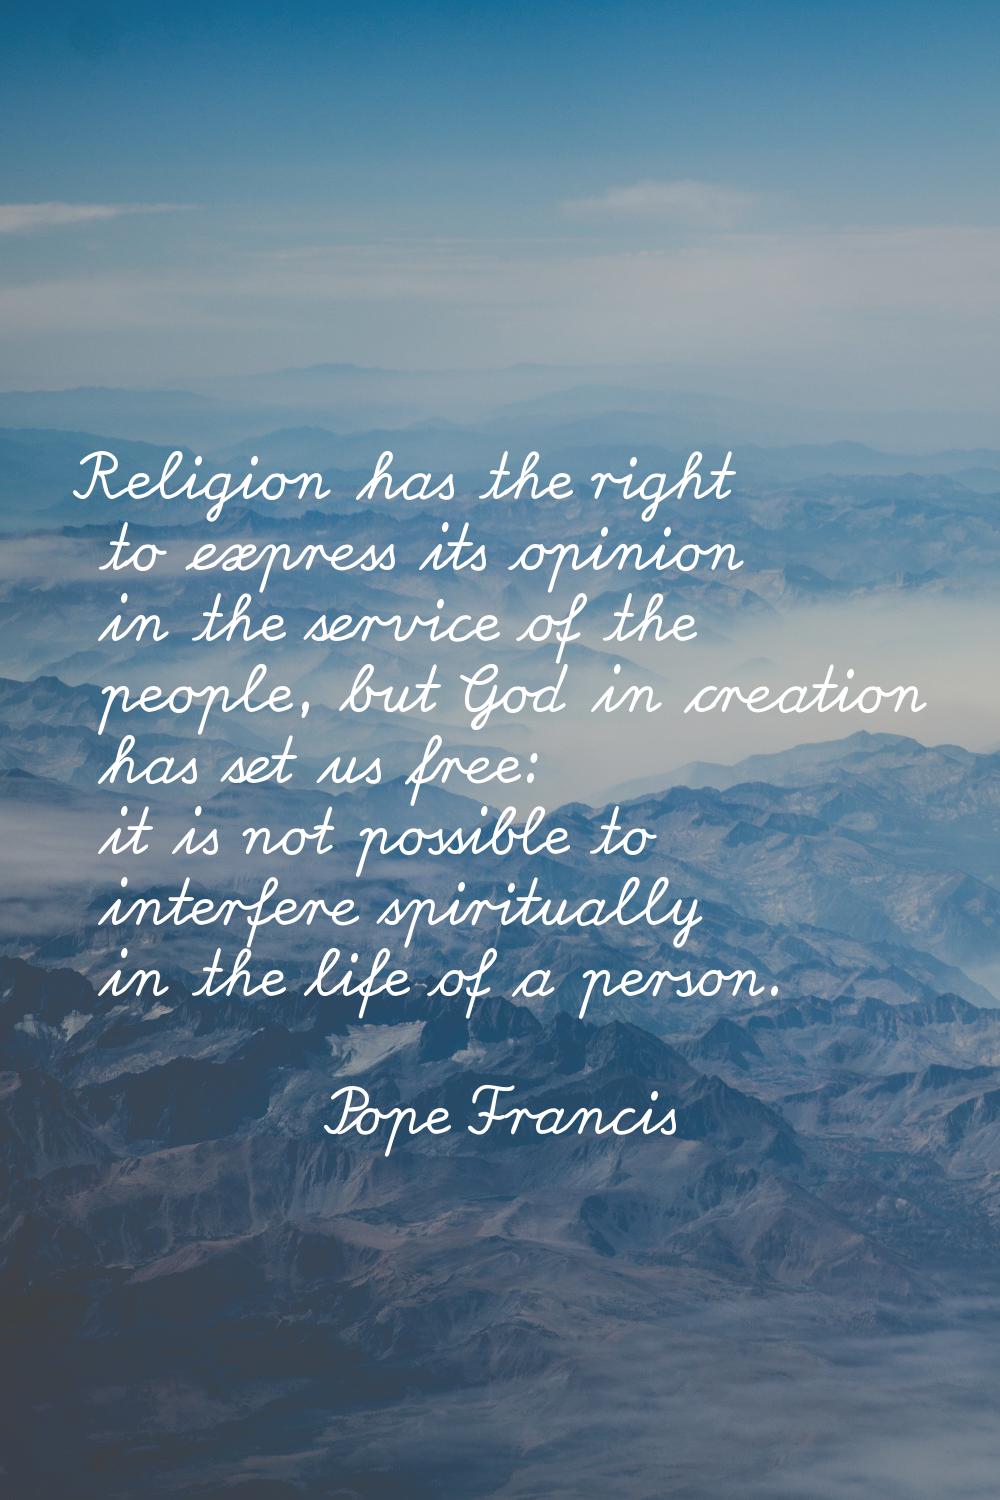 Religion has the right to express its opinion in the service of the people, but God in creation has